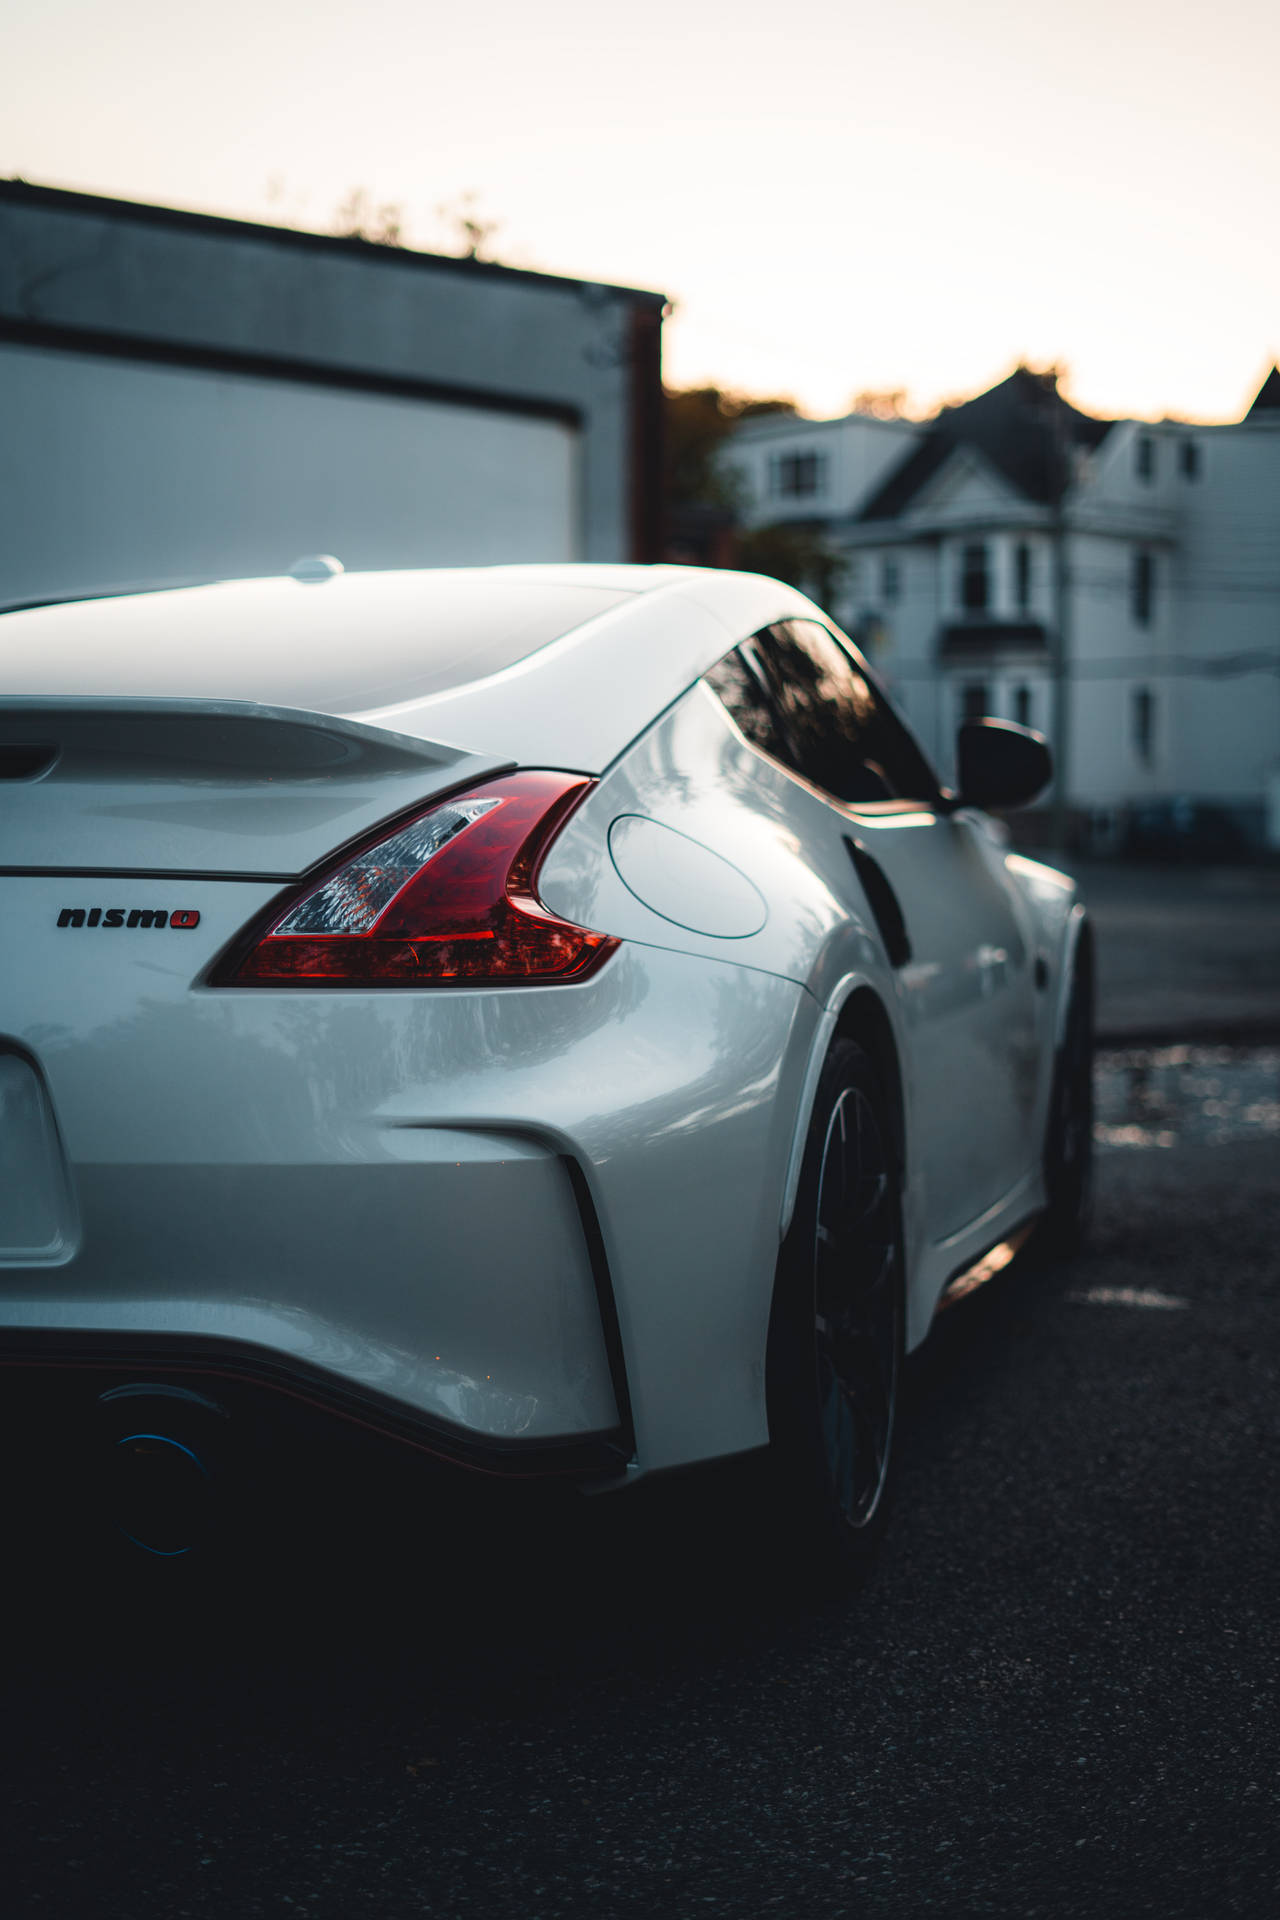 Look at the sleek and stylish design of the Nissan 370Z Wallpaper